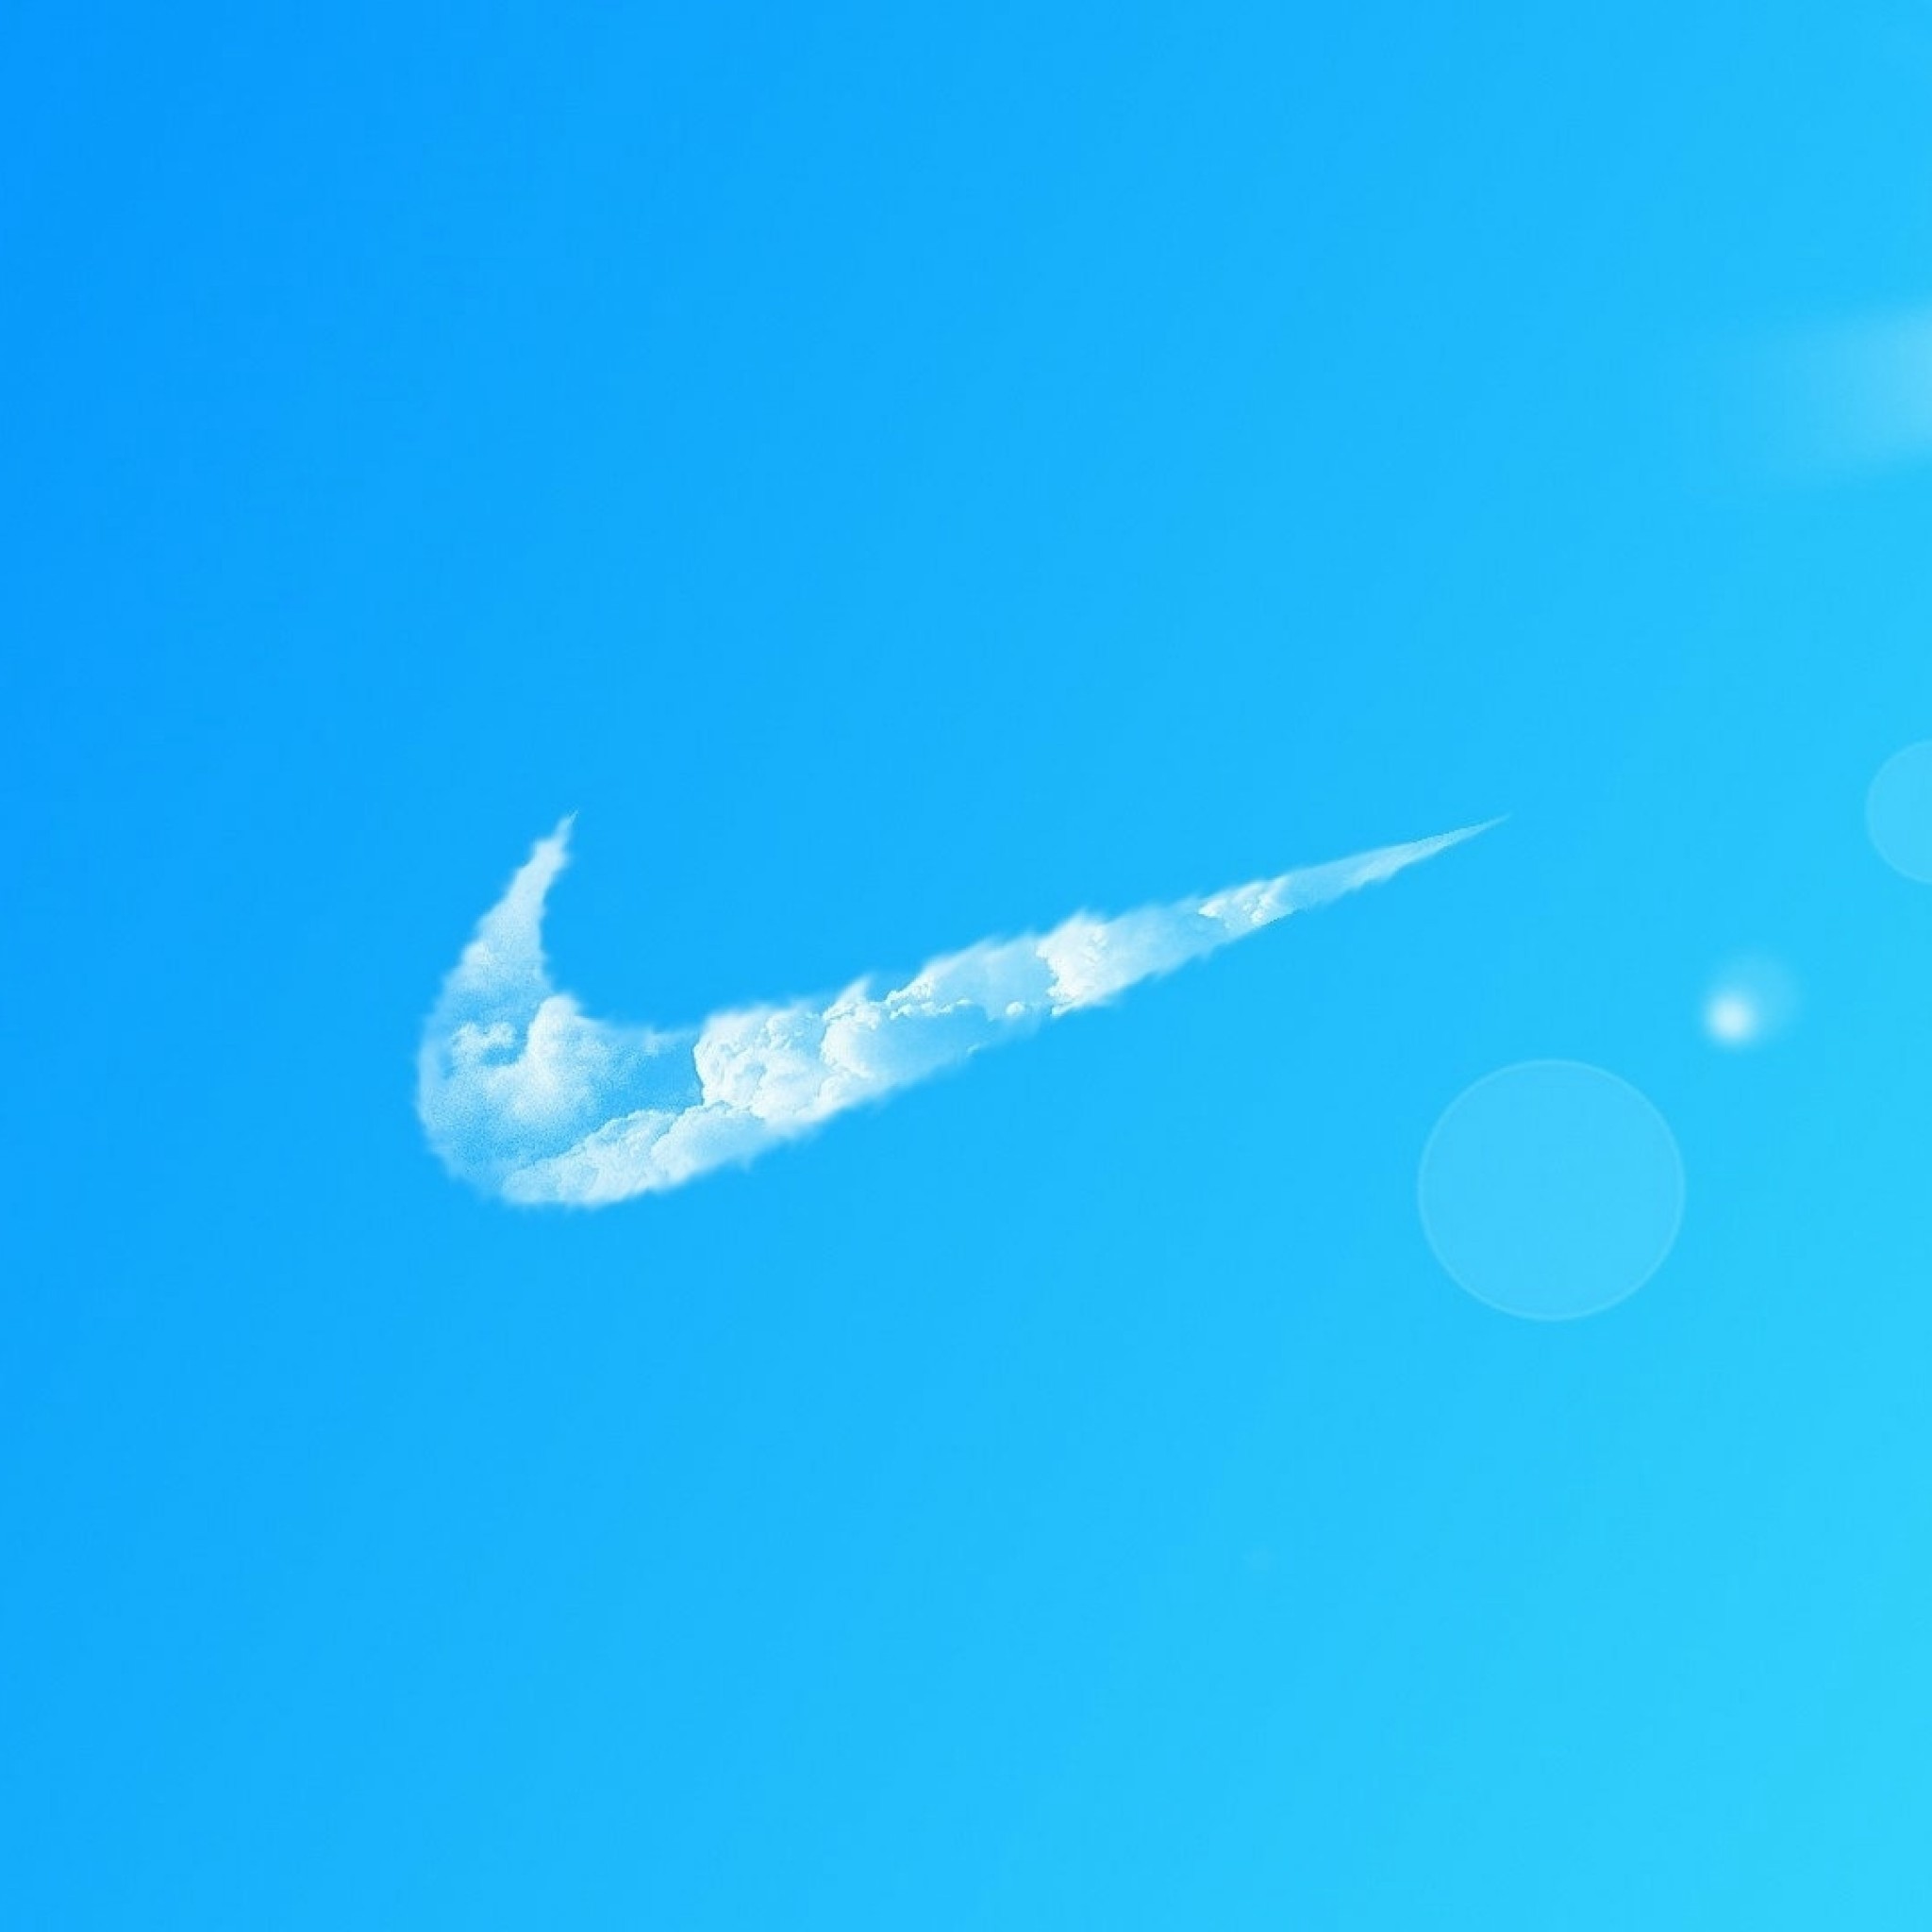 Nike Background For iPhone Wallpaper